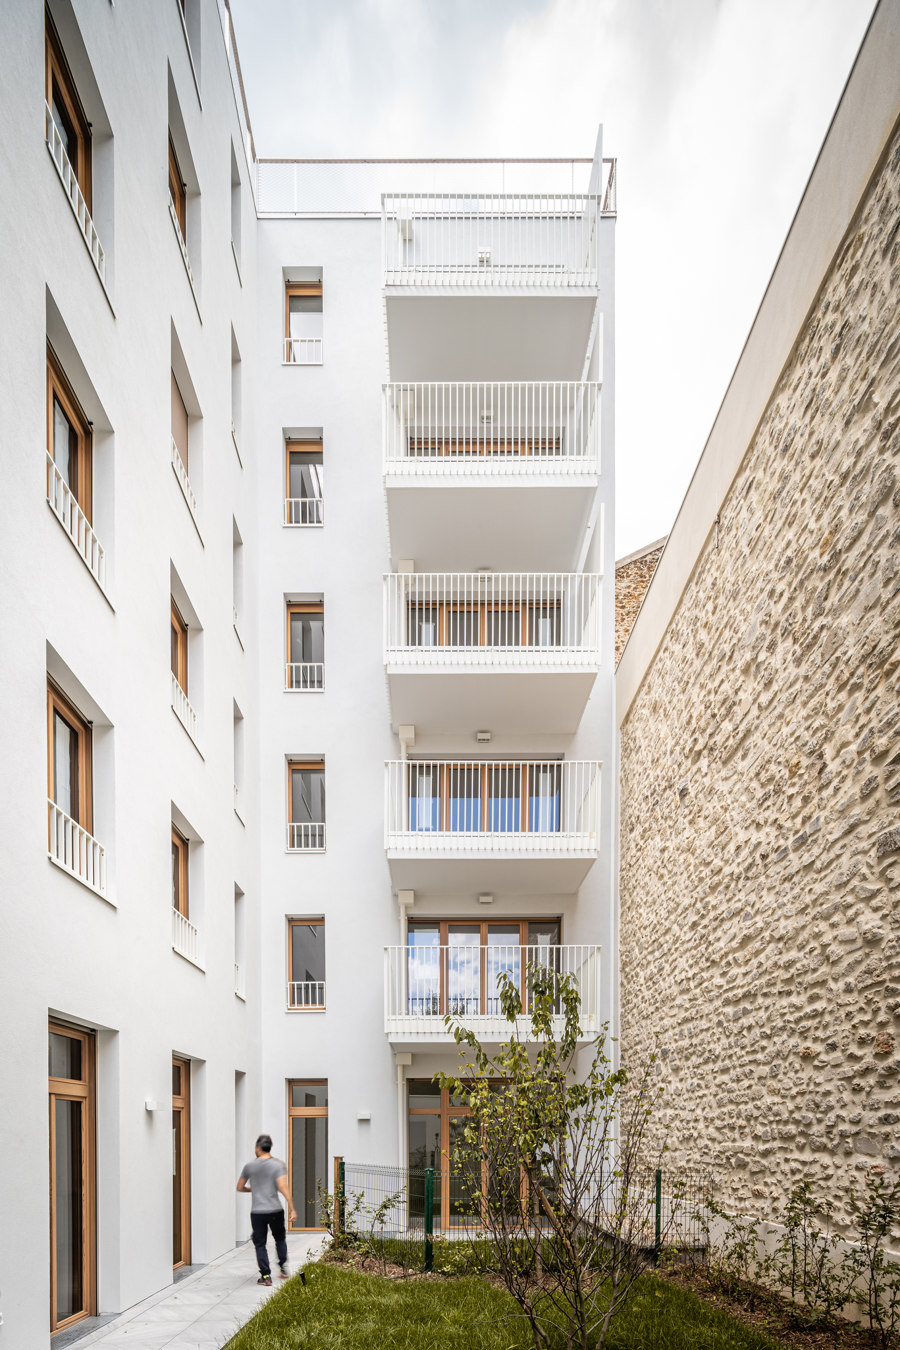 35 Social Housing Units by Mobile Architectural Office | Apartment blocks